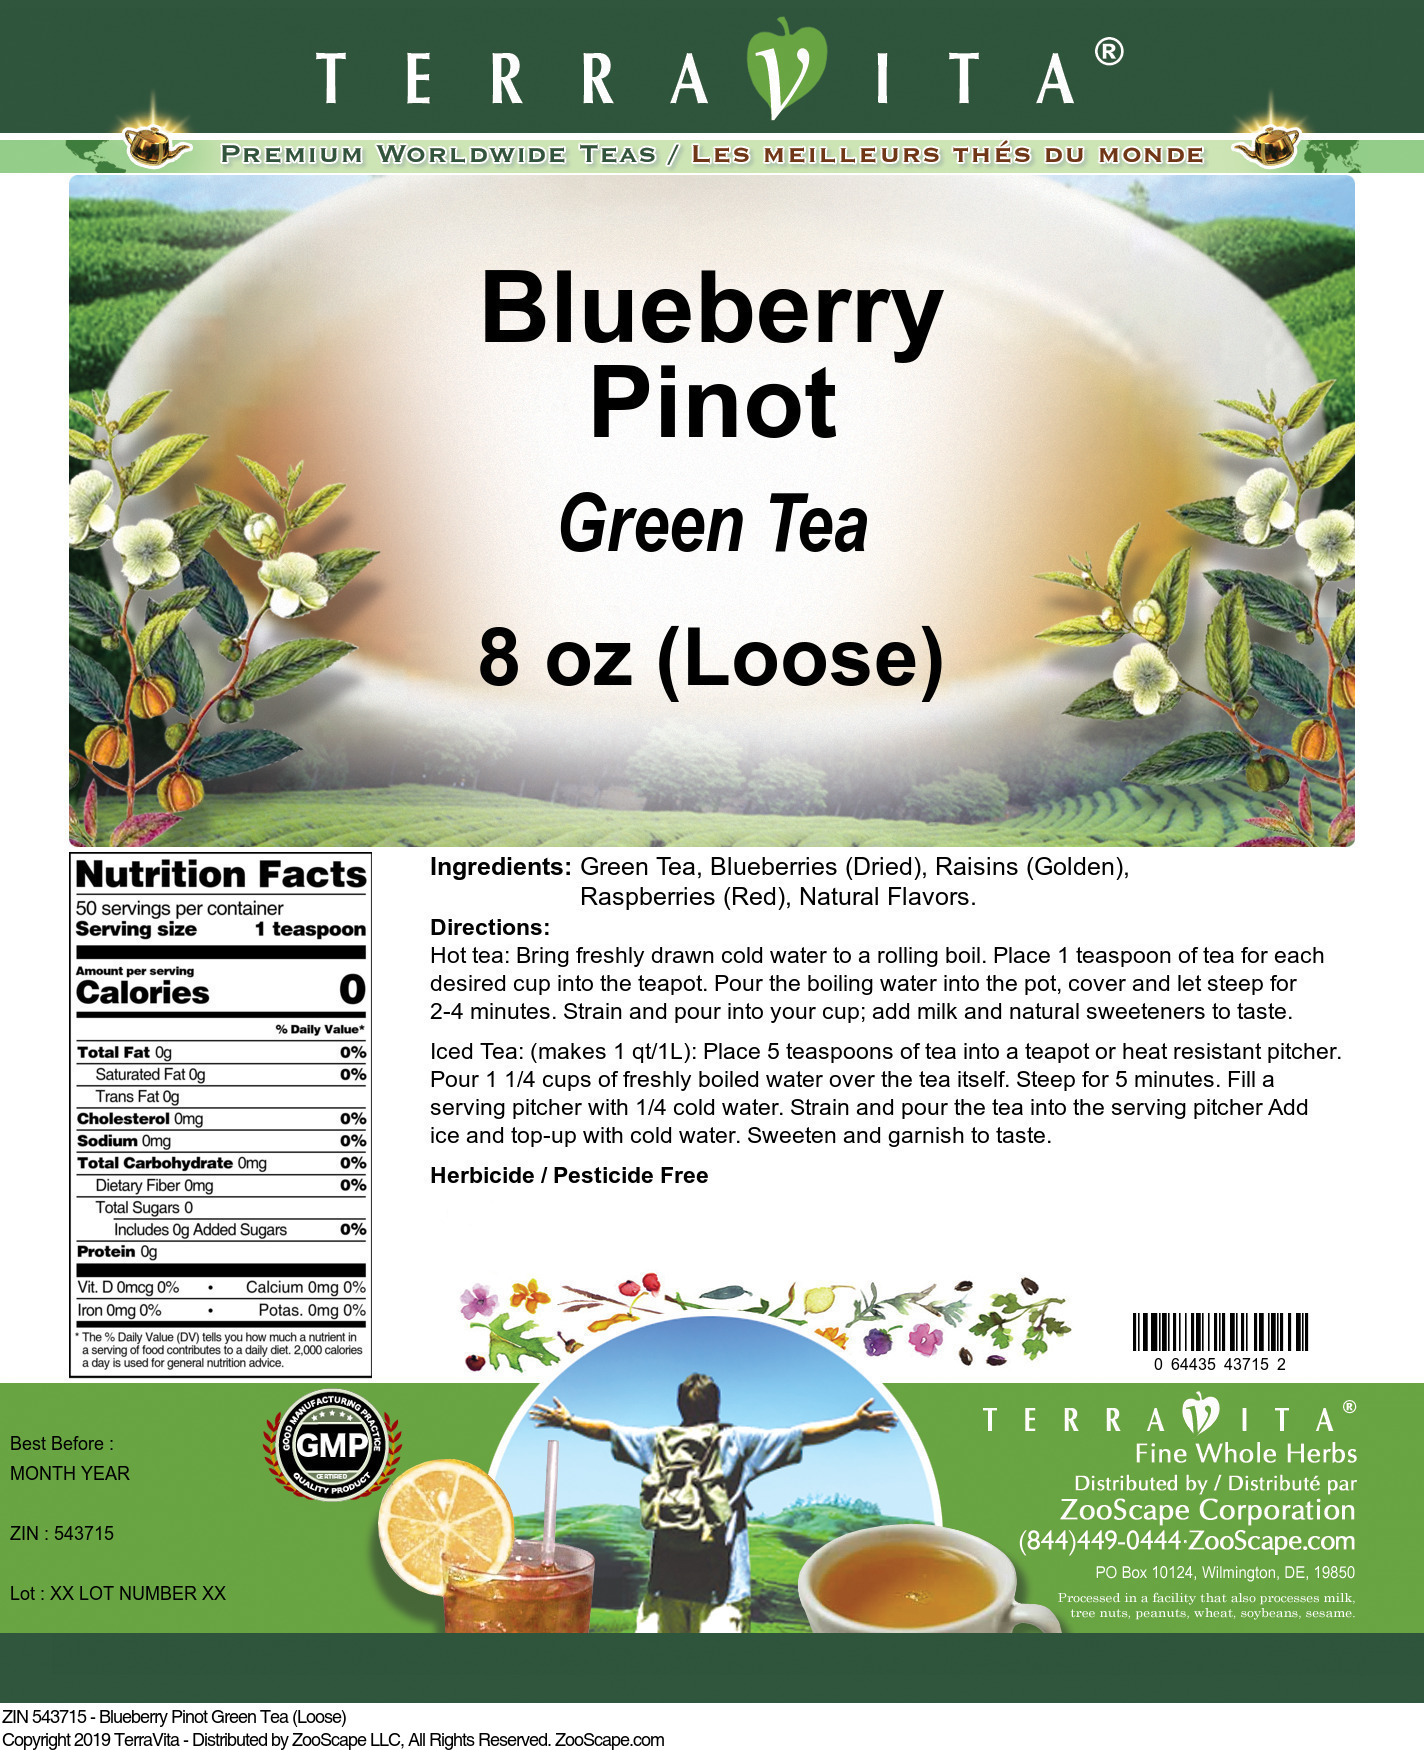 Blueberry Pinot Green Tea (Loose) - Label